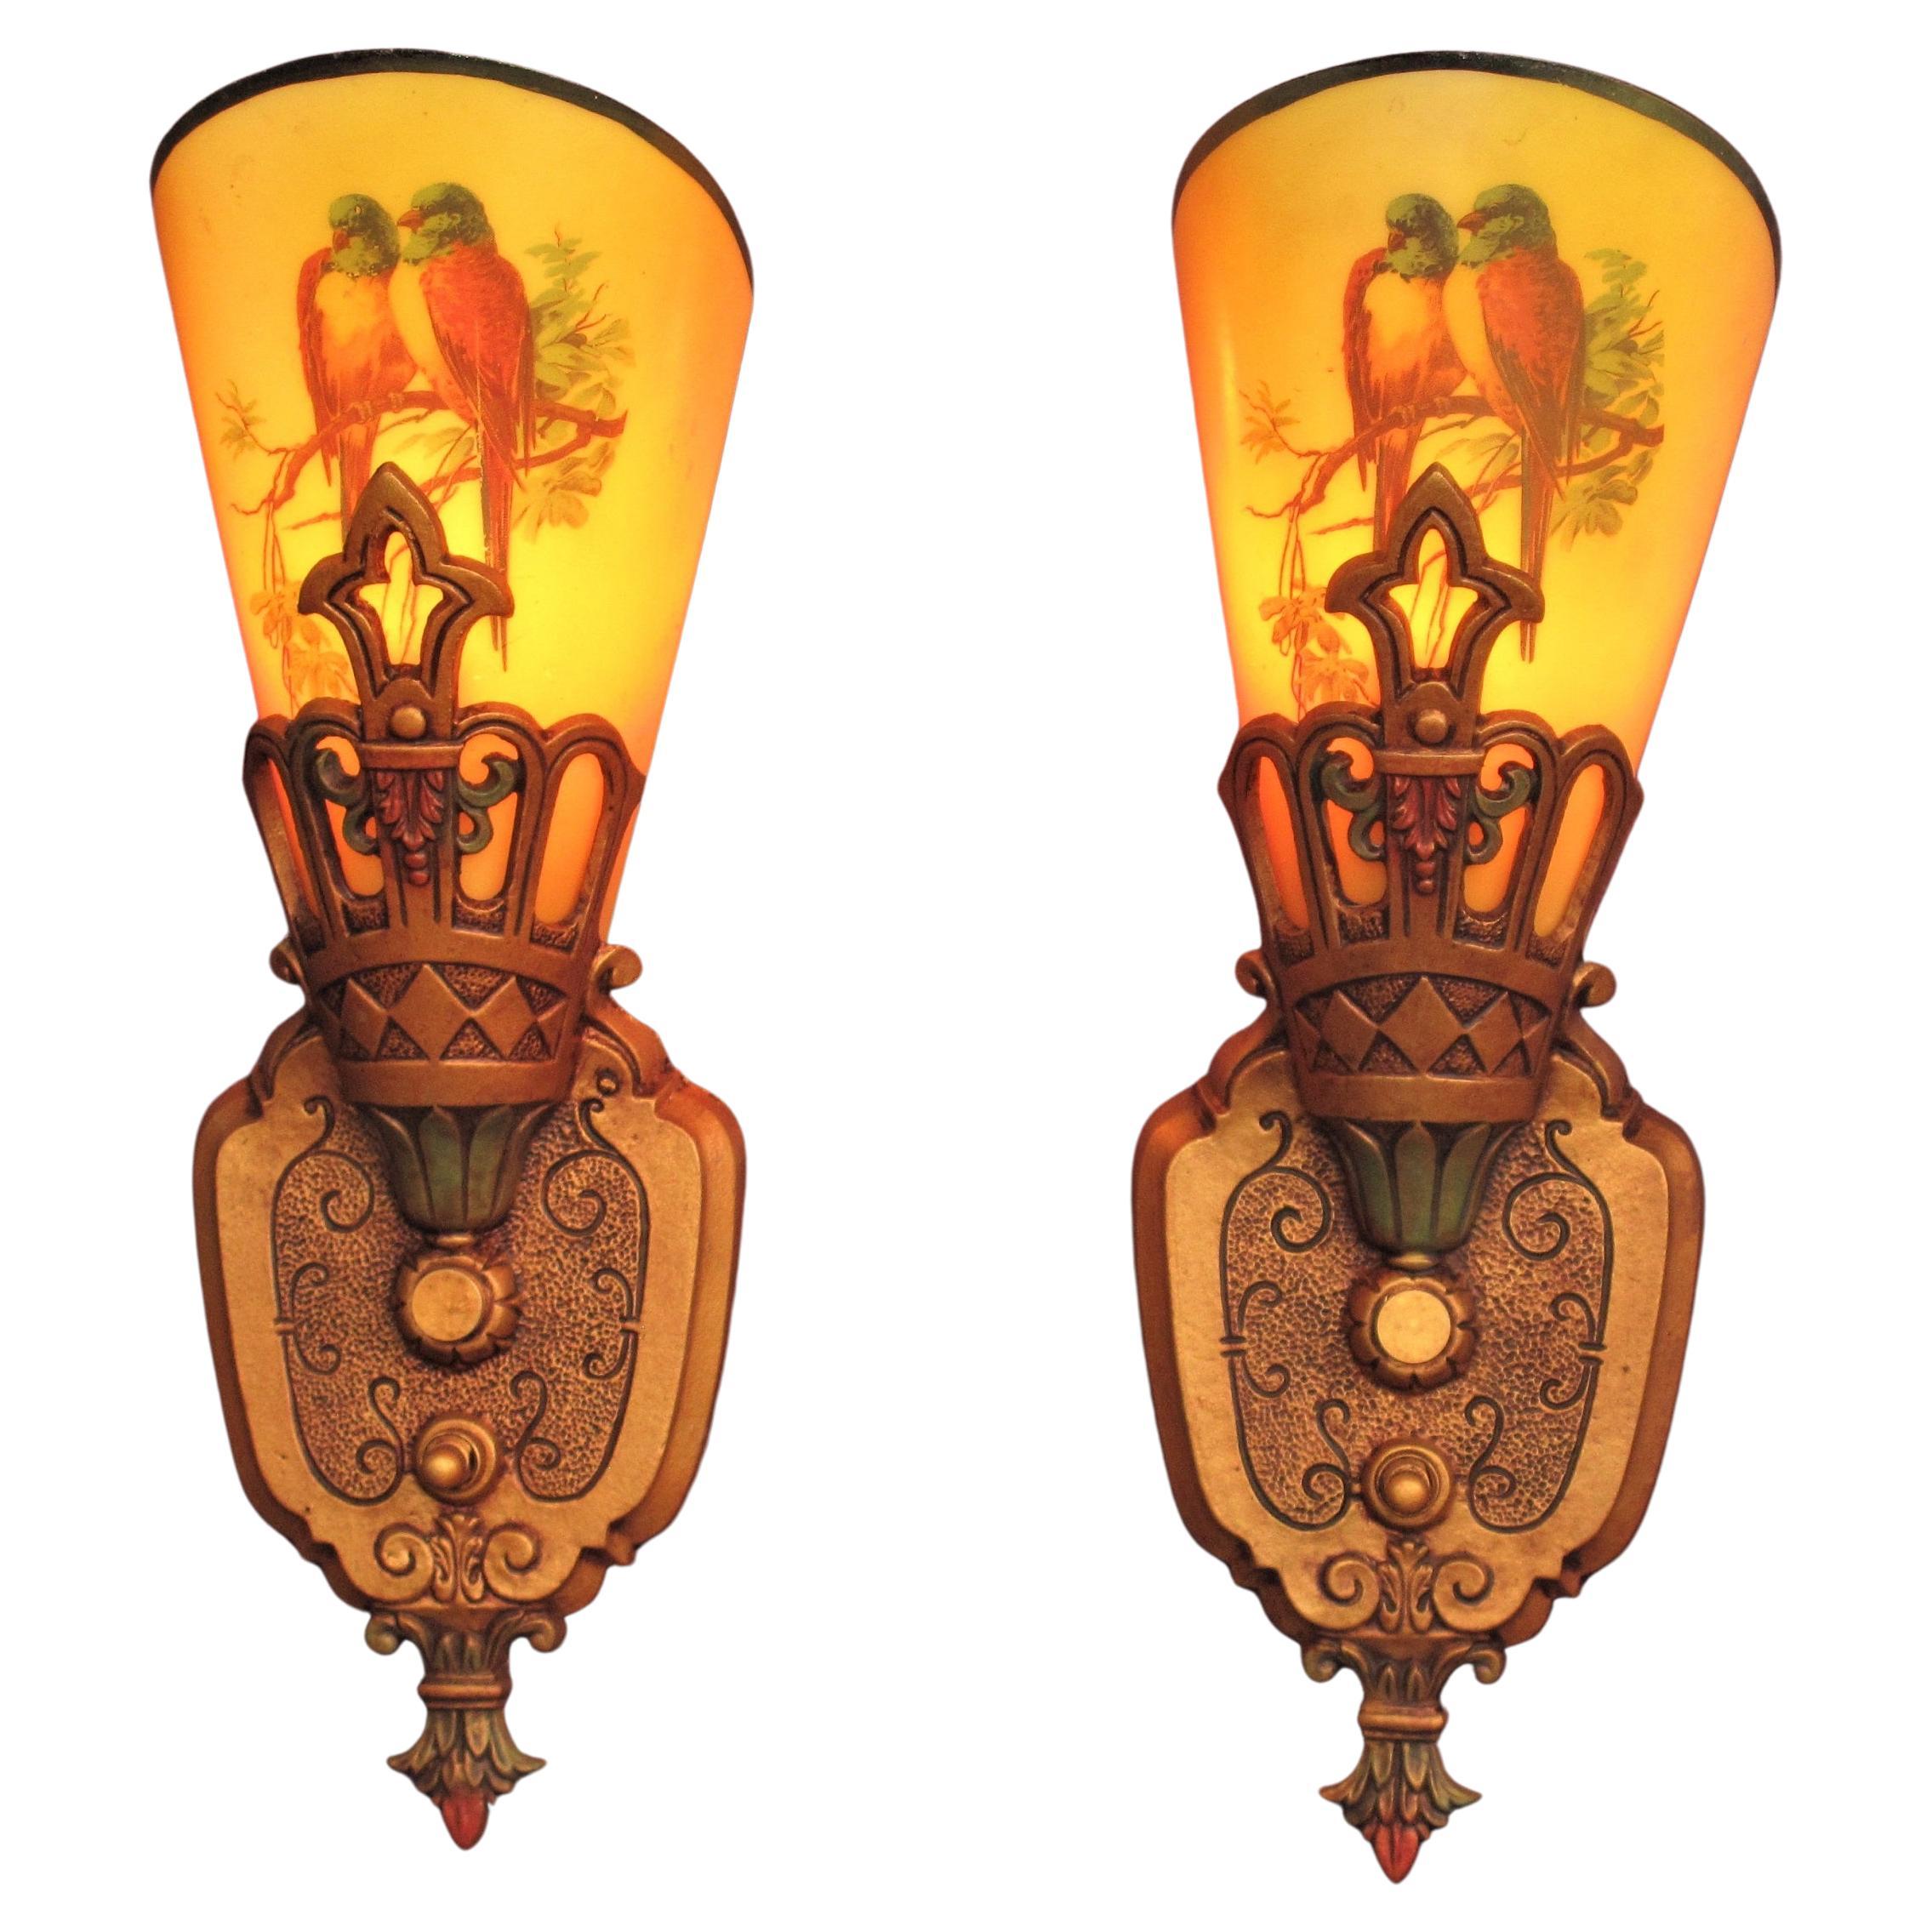 SINGLE ONLY - Not a pair. Vintage Parrot Slip Shade Sconce, Late 1920s For Sale